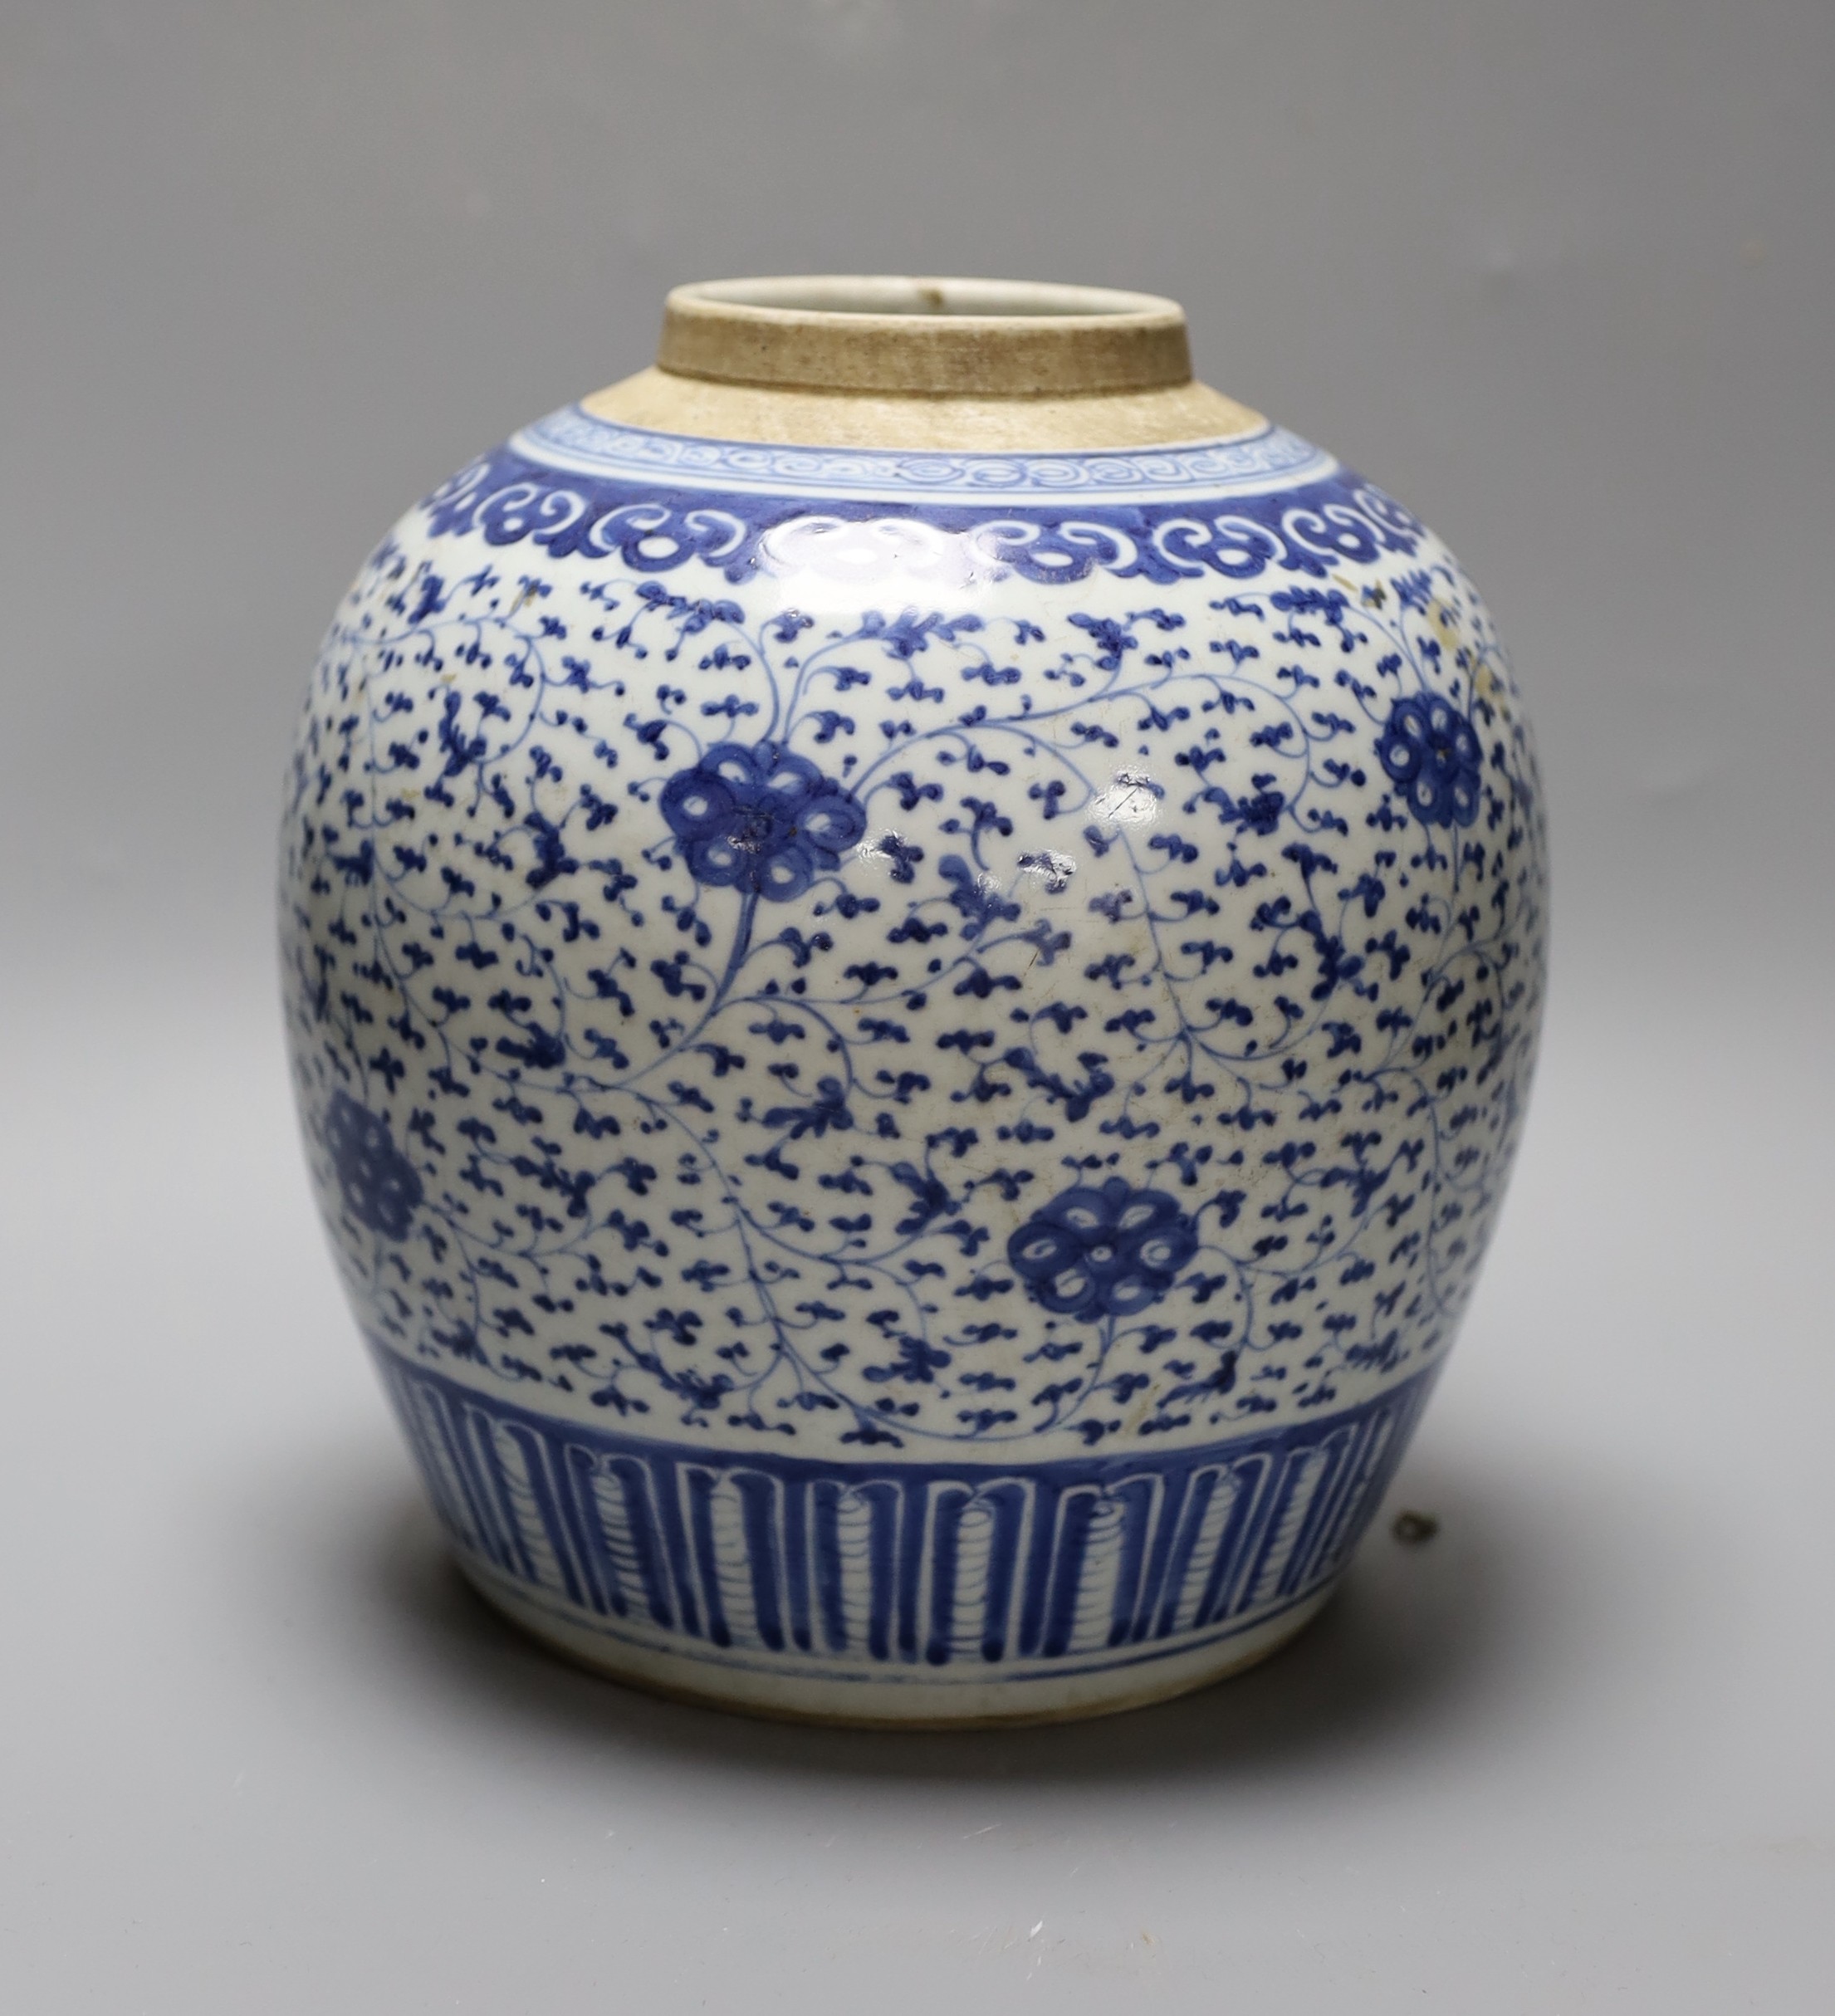 An 18th-century Chinese blue and white ovoid jar, 23 cm high